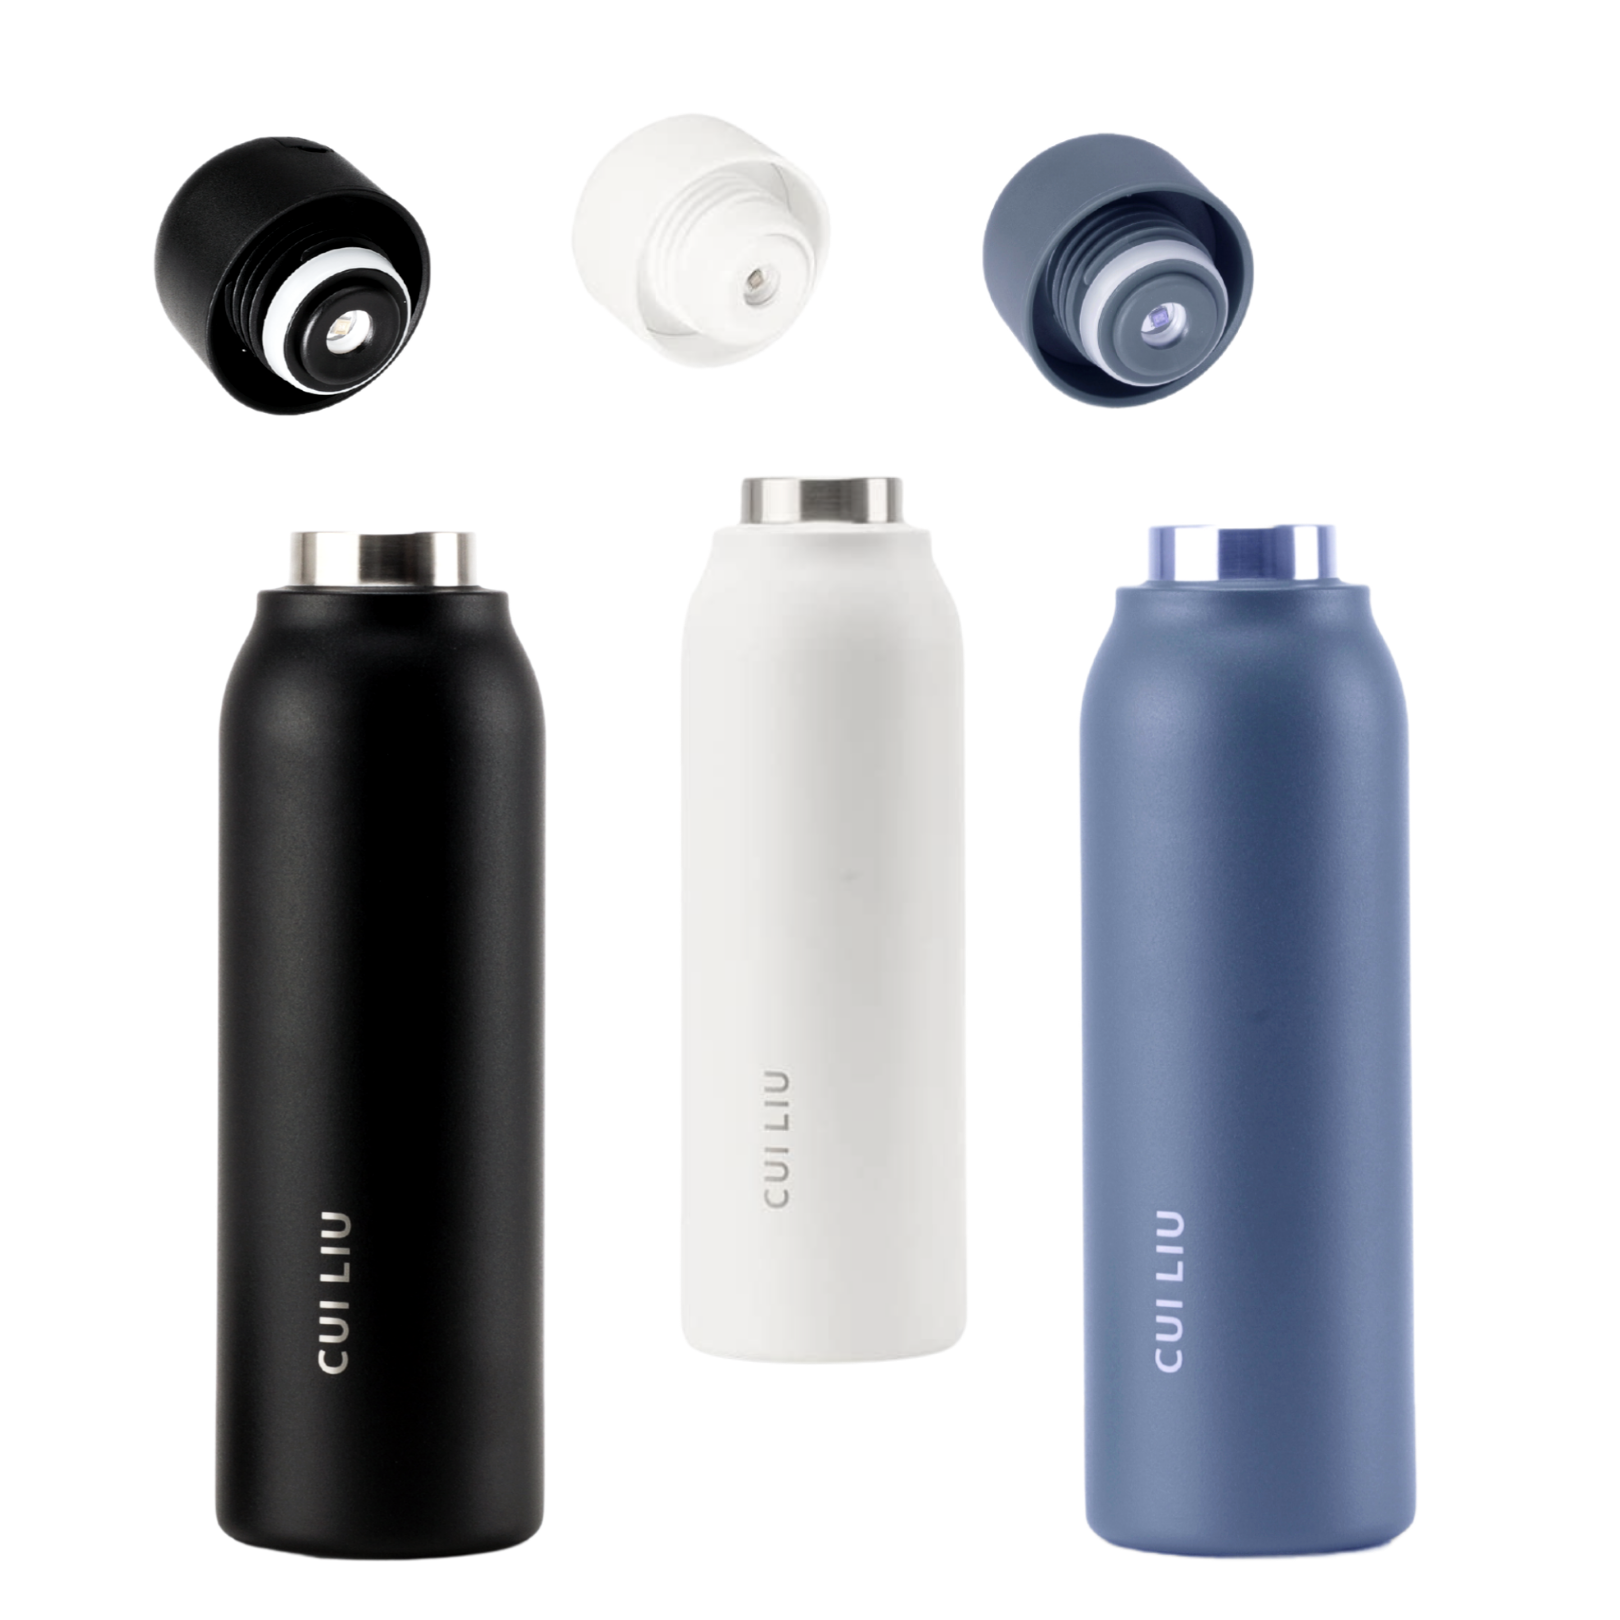 Do You Really Need A Self-Cleaning Water Bottle?